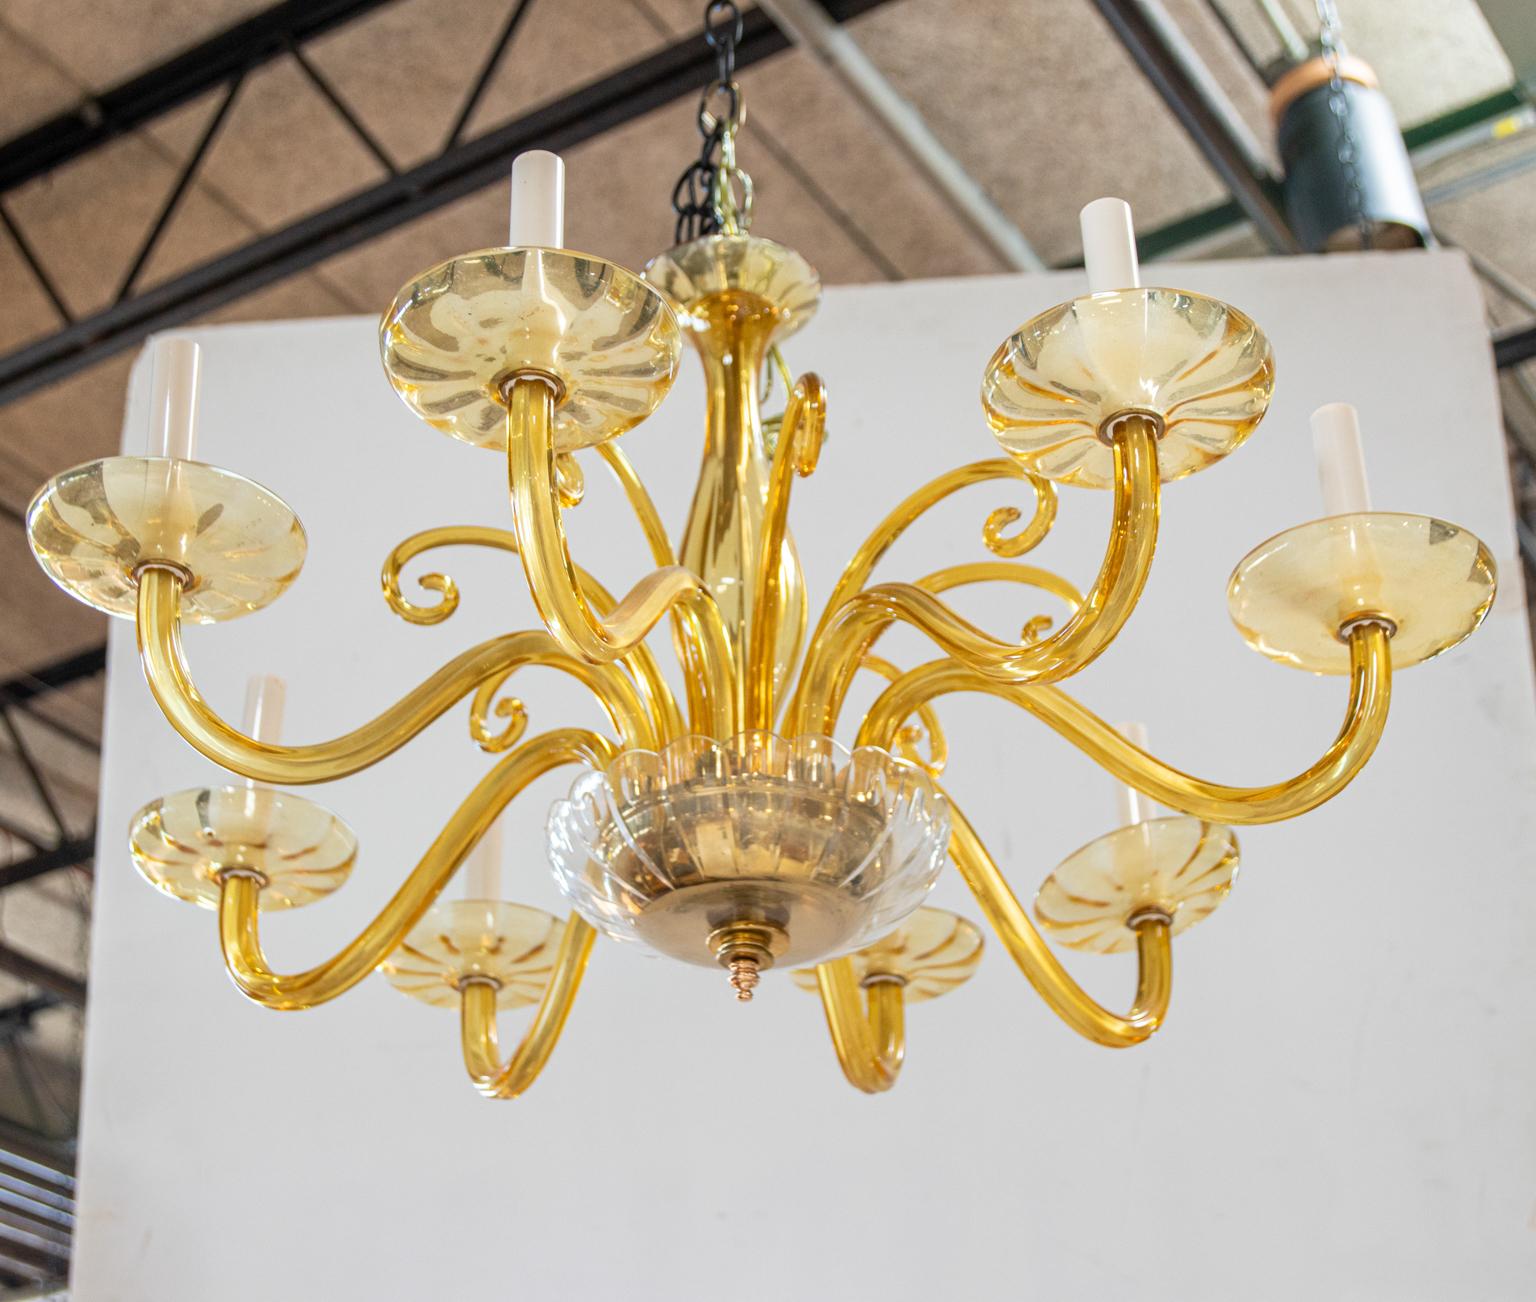 Circa 1940s large murano glass chandelier in an amber hue with glass bobeches. The chandelier is further detailed with scrolled glass accents and a glass dome finial at the base with scalloped trim. Please note of wear consistent with age. Shades